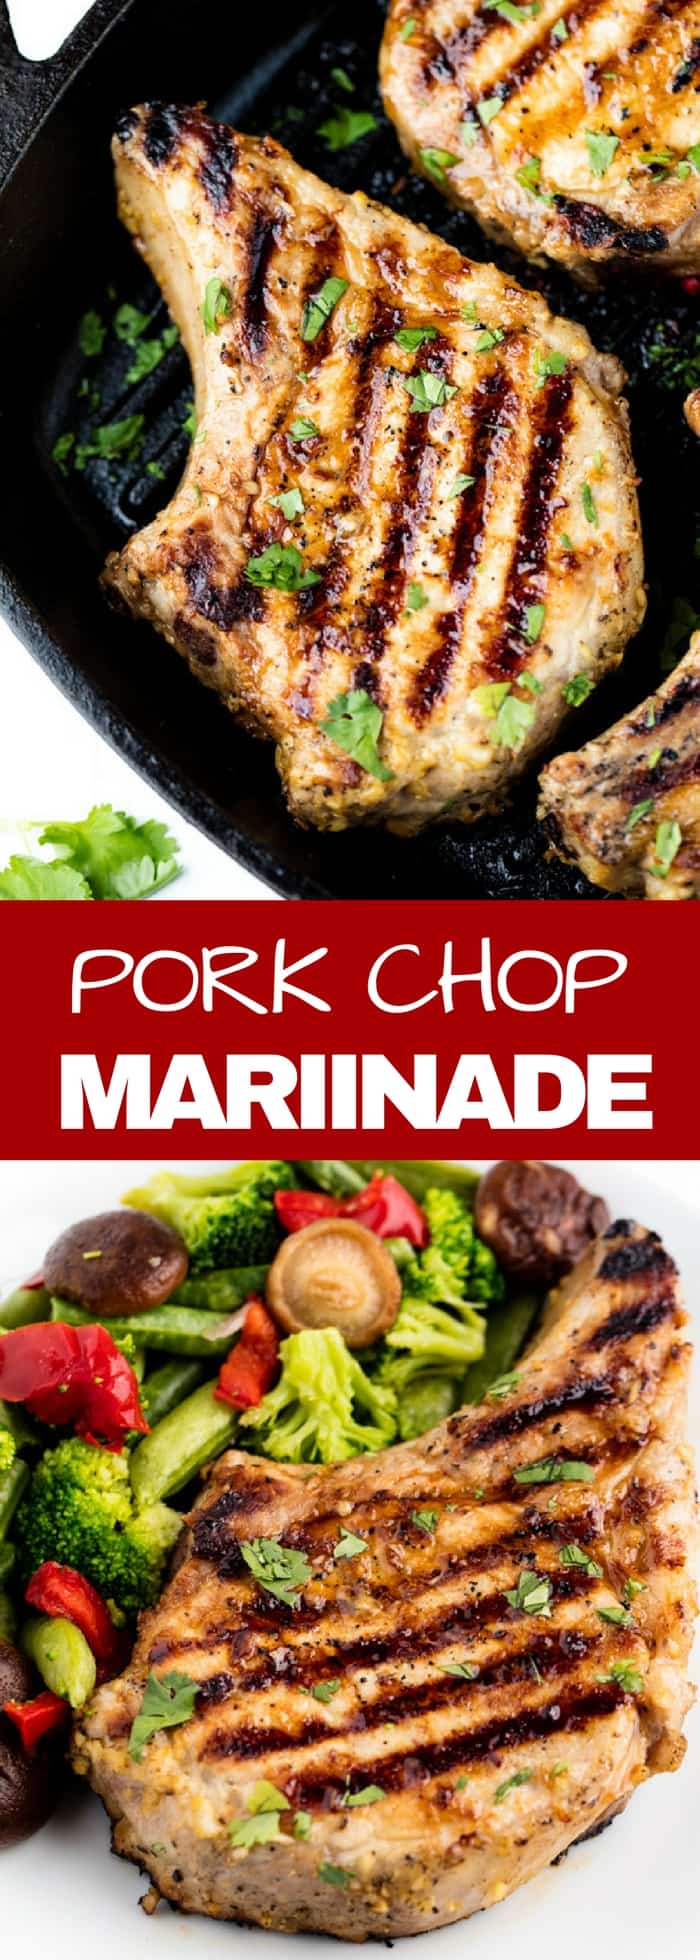 The Best Pork Chop Marinade is easy to make and perfect for any preparation of pork chops whether they are pan fried, baked, or grilled. 